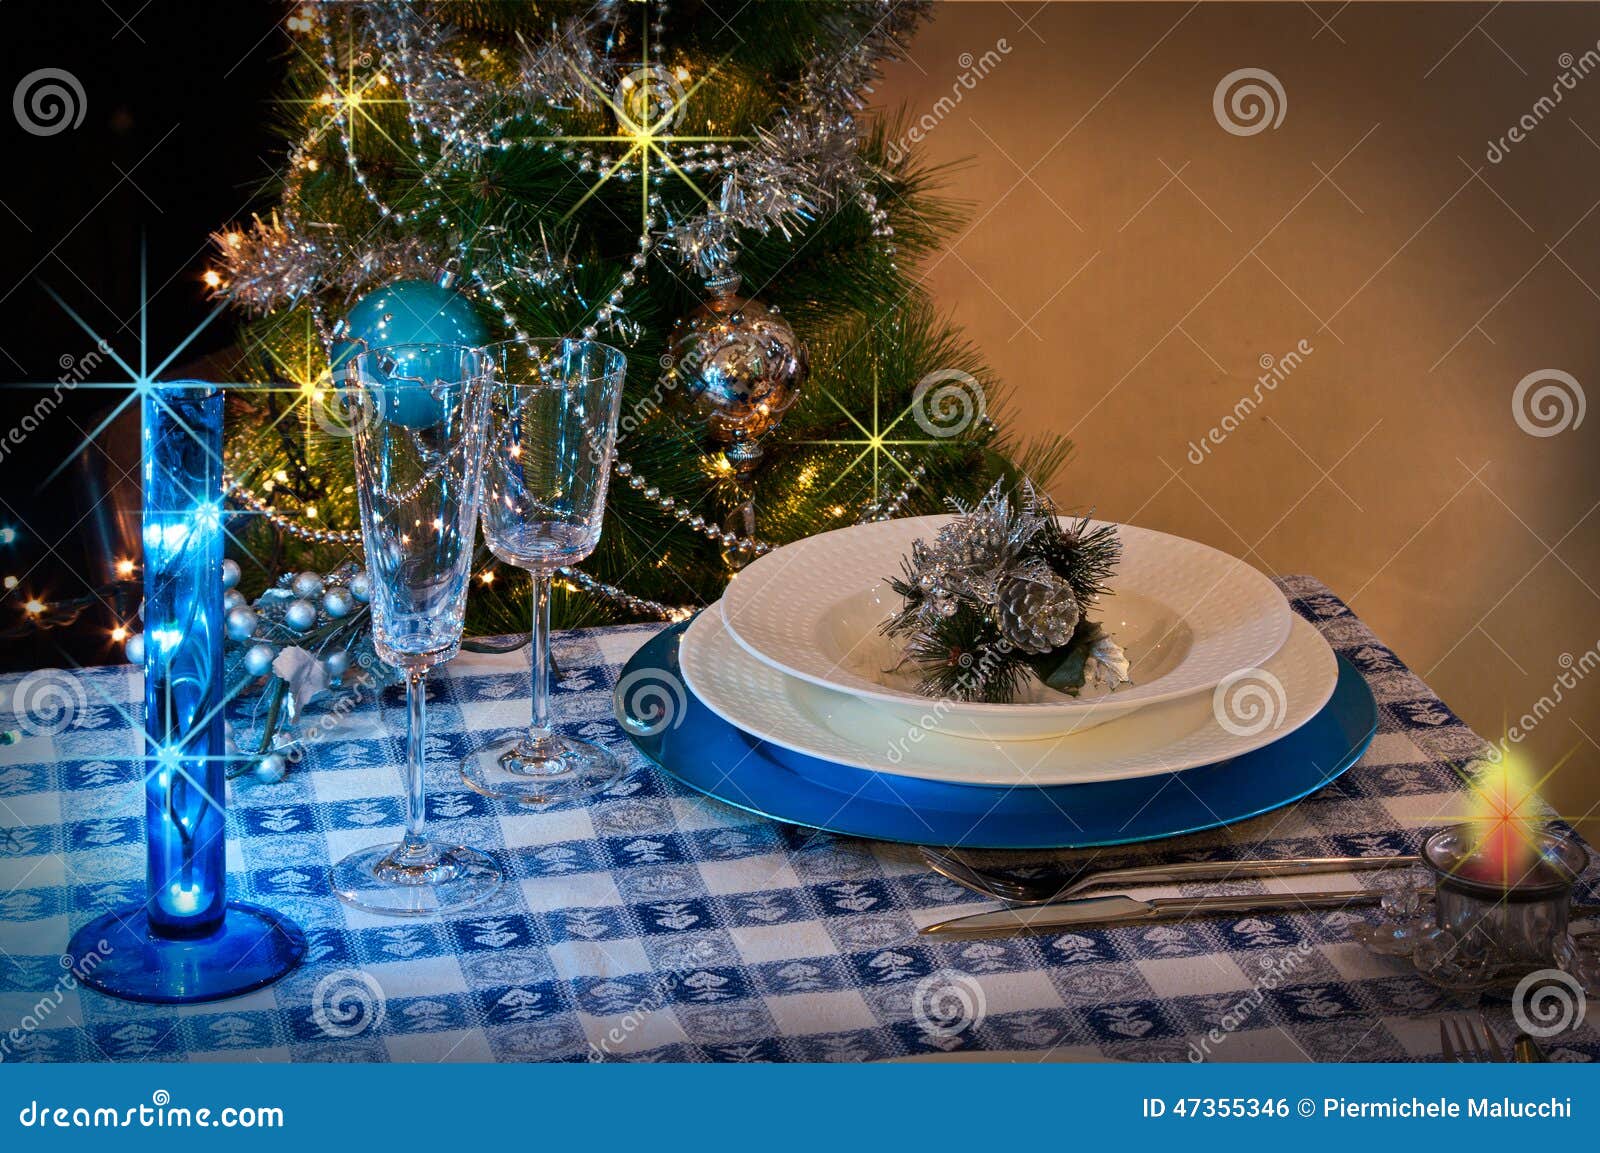 Table Set For Christmas Dinner With Decoration Blue And 